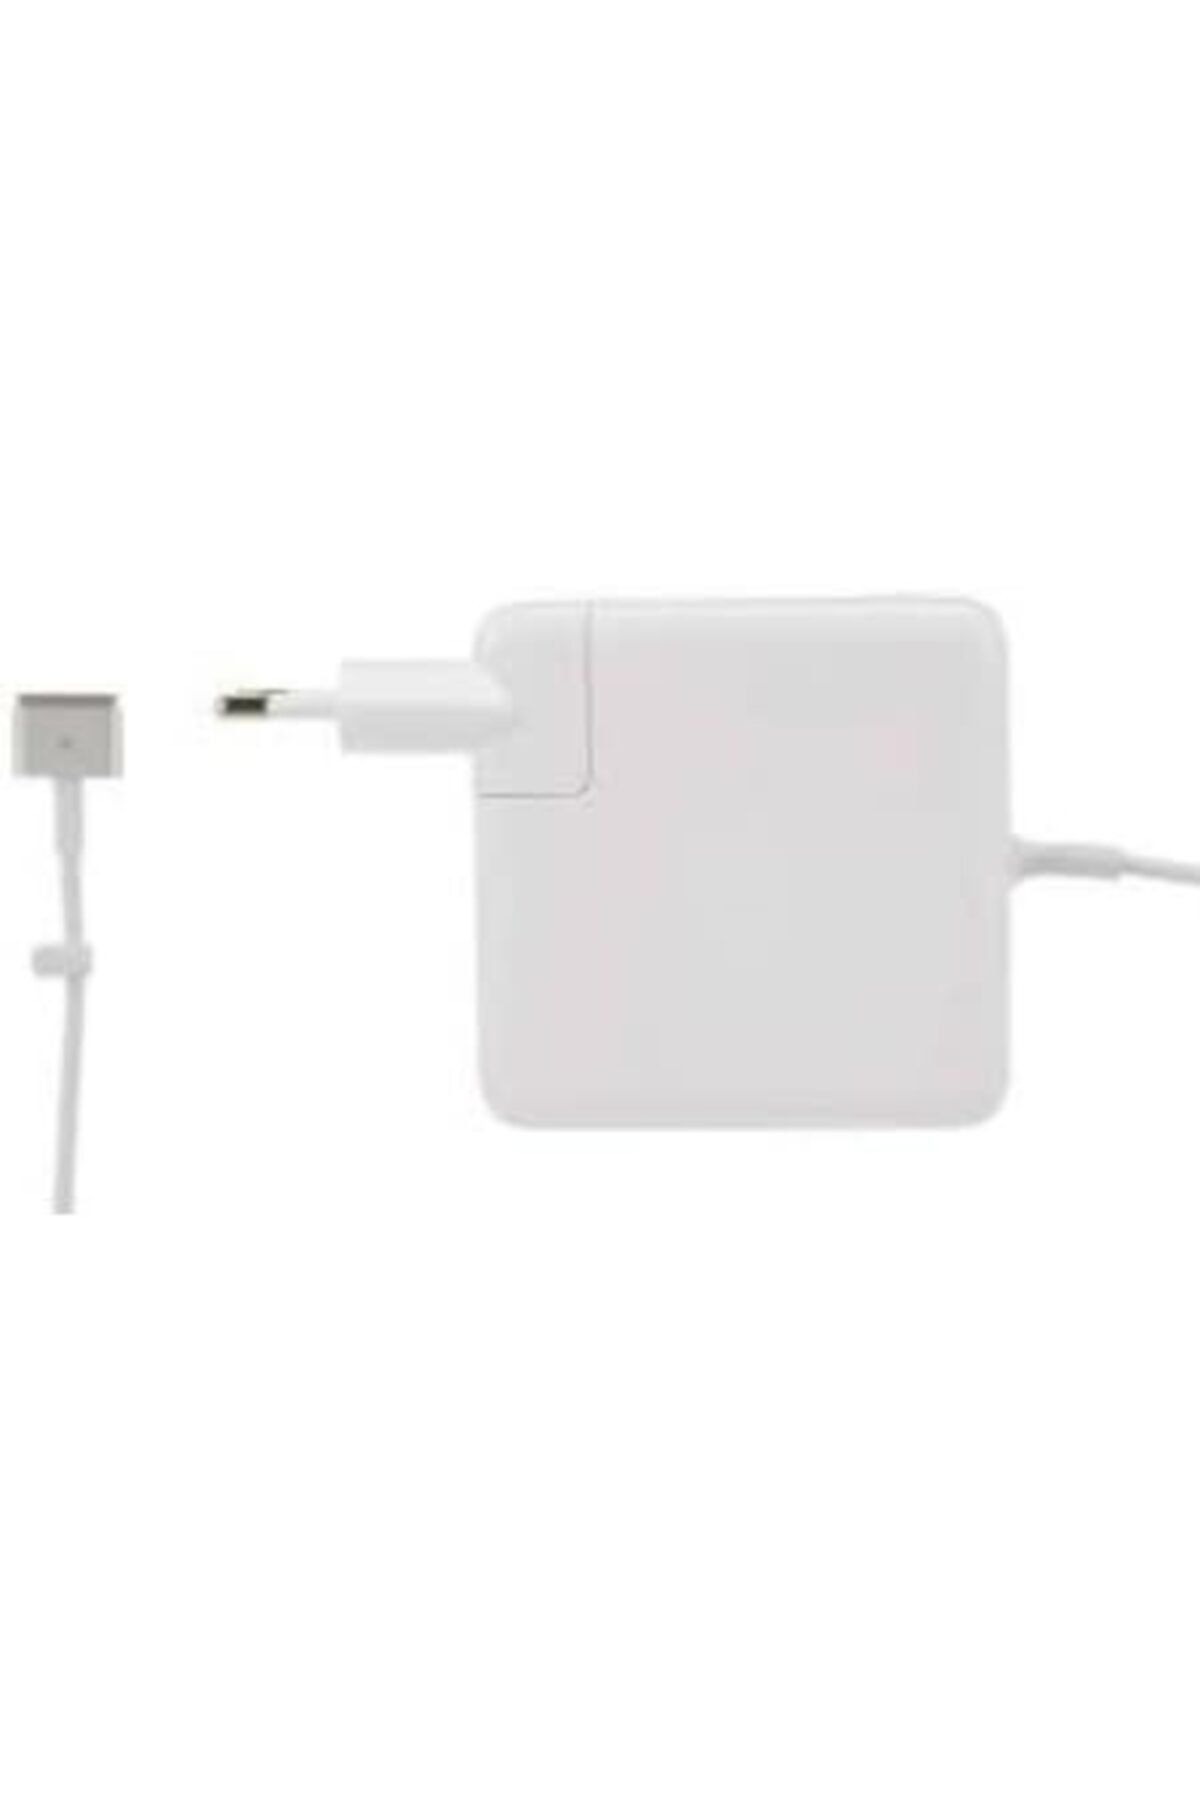 Apple 85w Magsafe 2 Power Adapter Md506tu/a